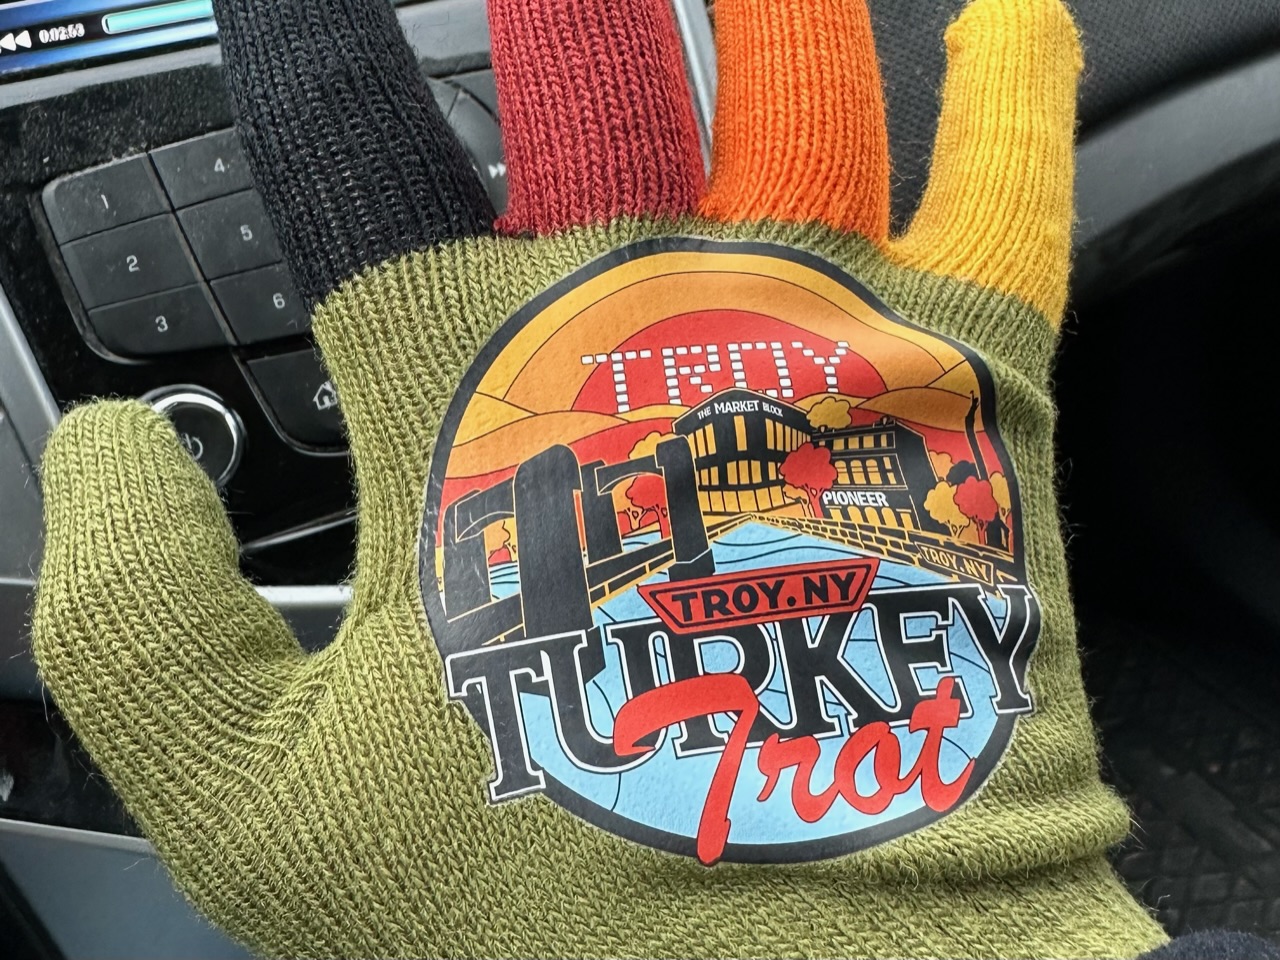 The back of a hand in a multicolored knit glove. Most of the glove is an olive green. The index finger is black, middle finger is red, ring finger is orange, and the pinkie is yellow. On the back of the glove is a graphic which reads "Troy, NY Turkey Trot".